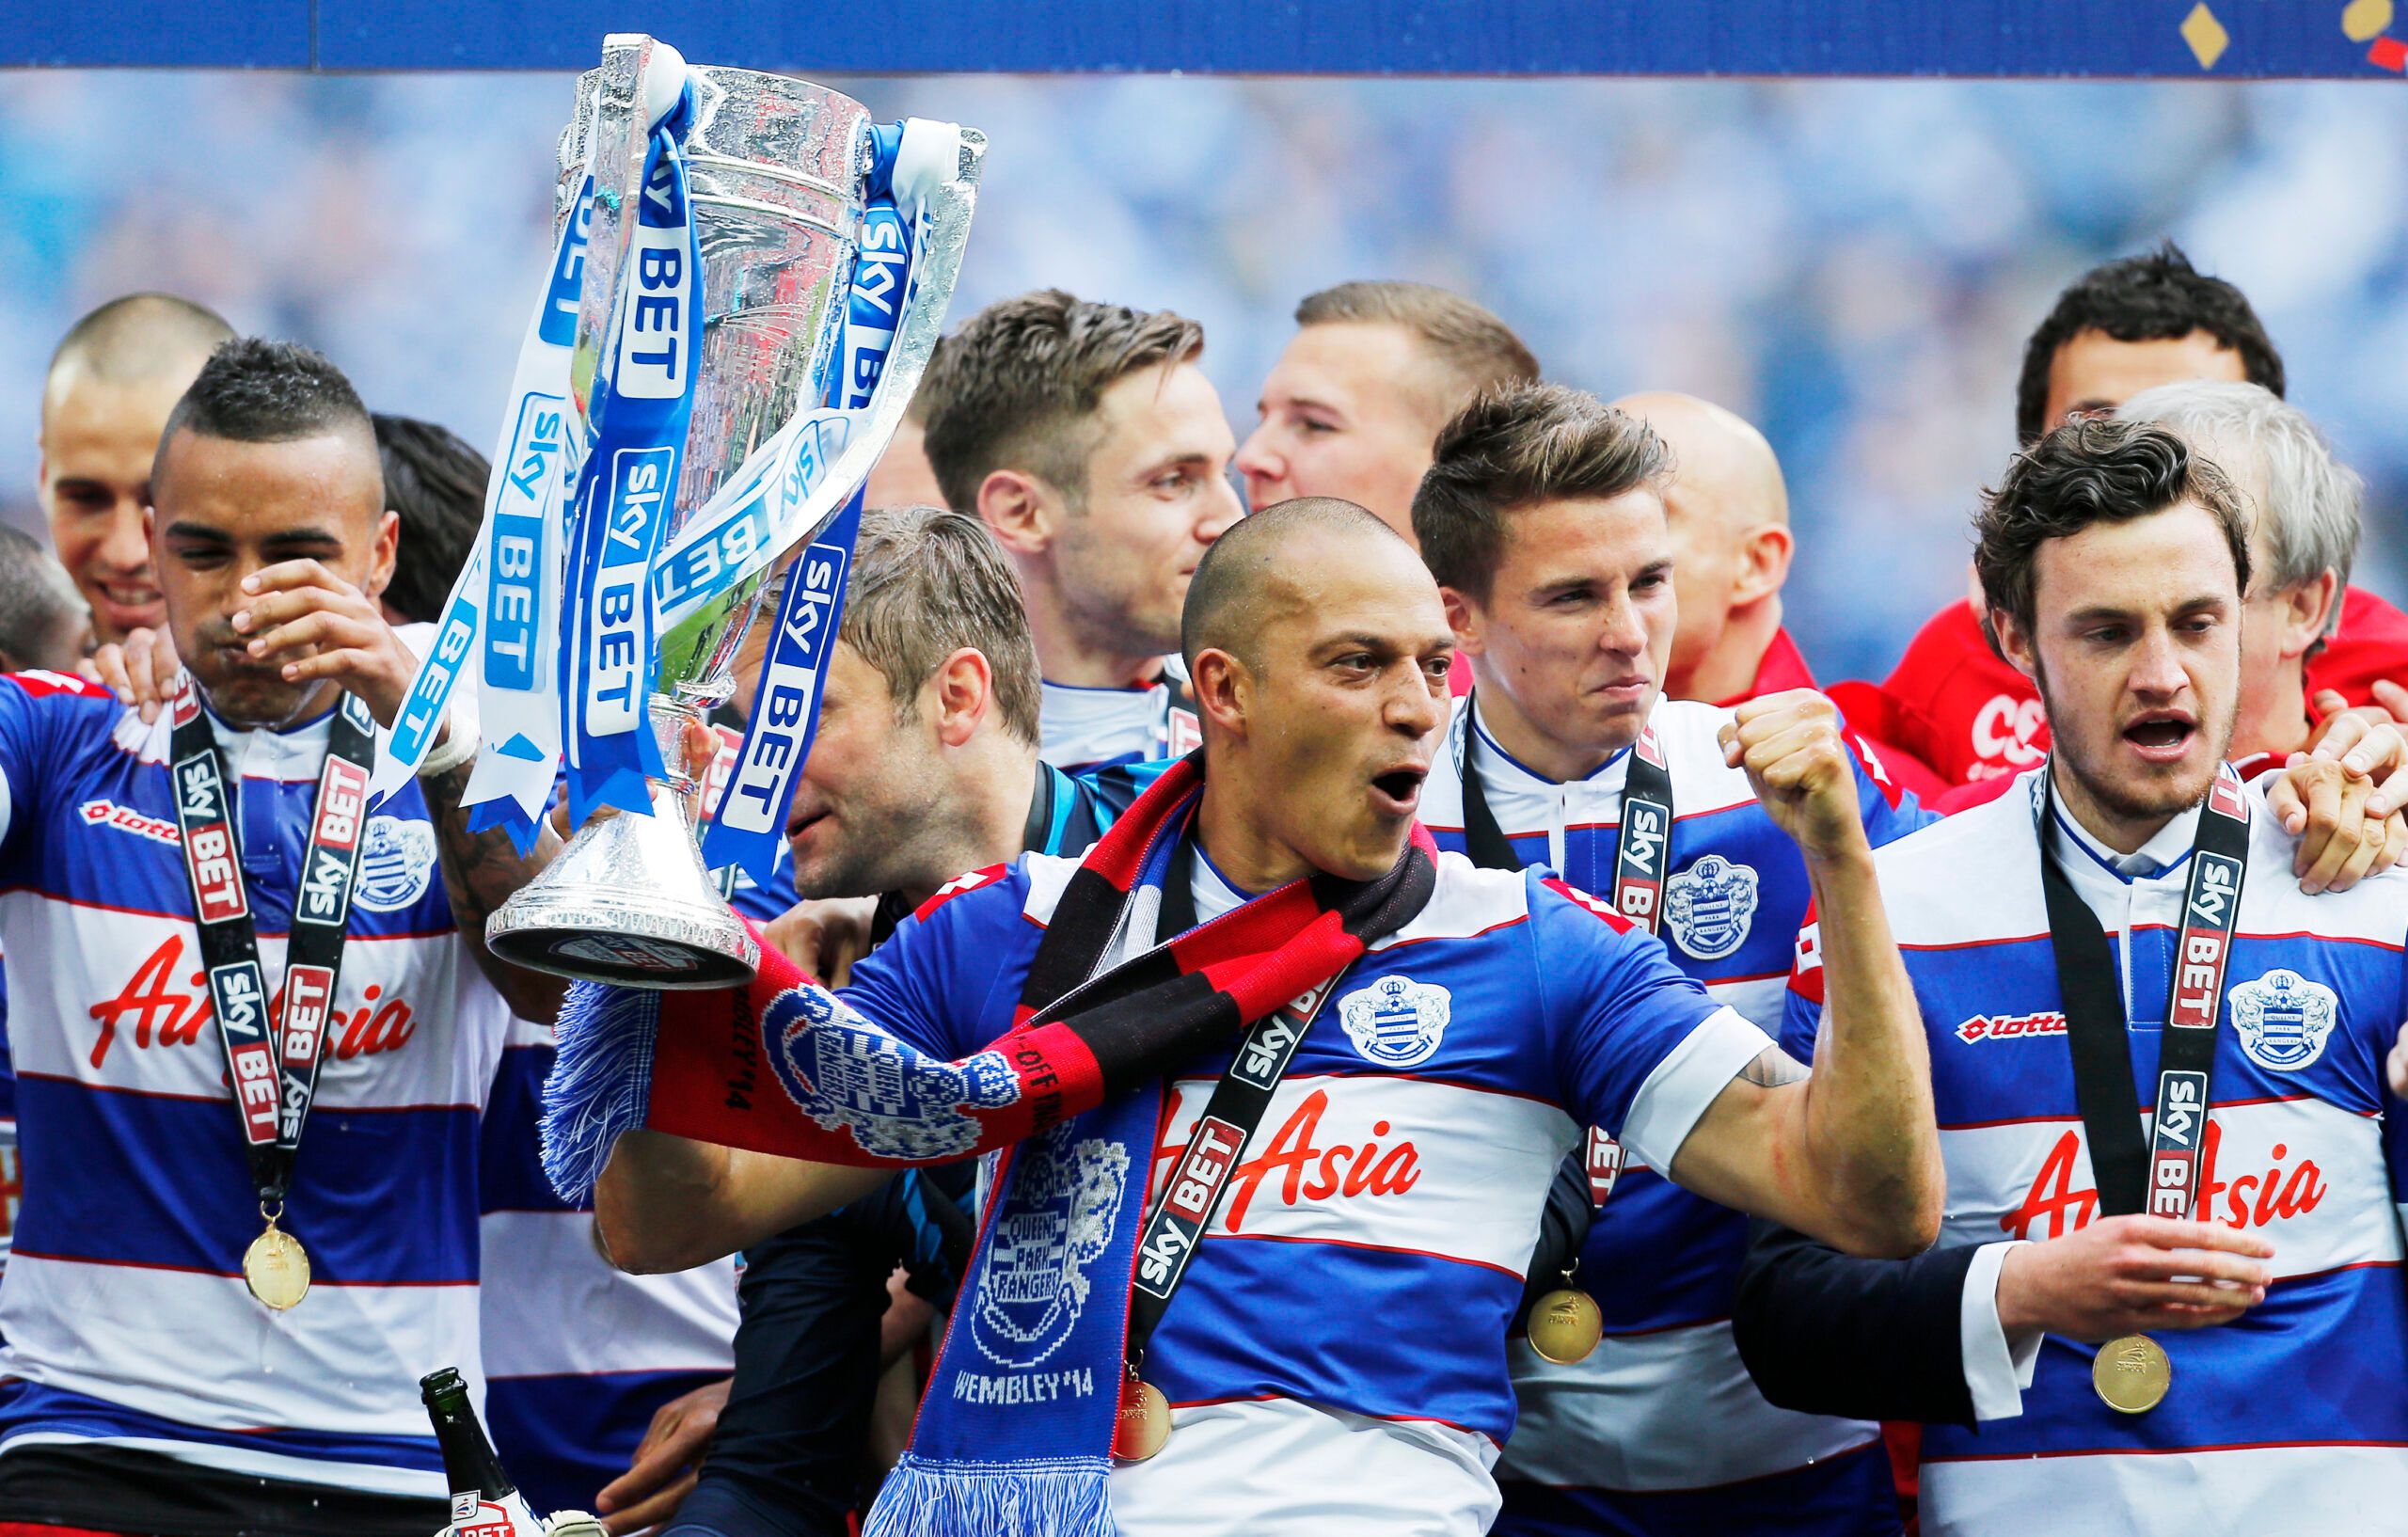 Football - Derby County v Queens Park Rangers - Sky Bet Football League Championship Play-Off Final - Wembley Stadium - 24/5/14 
QPR's Bobby Zamora (C) celebrates with the trophy and team mates after winning the Football League Championship Play Off Final 
Mandatory Credit: Action Images / Andrew Couldridge 
Livepic 
EDITORIAL USE ONLY. No use with unauthorized audio, video, data, fixture lists, club/league logos or 